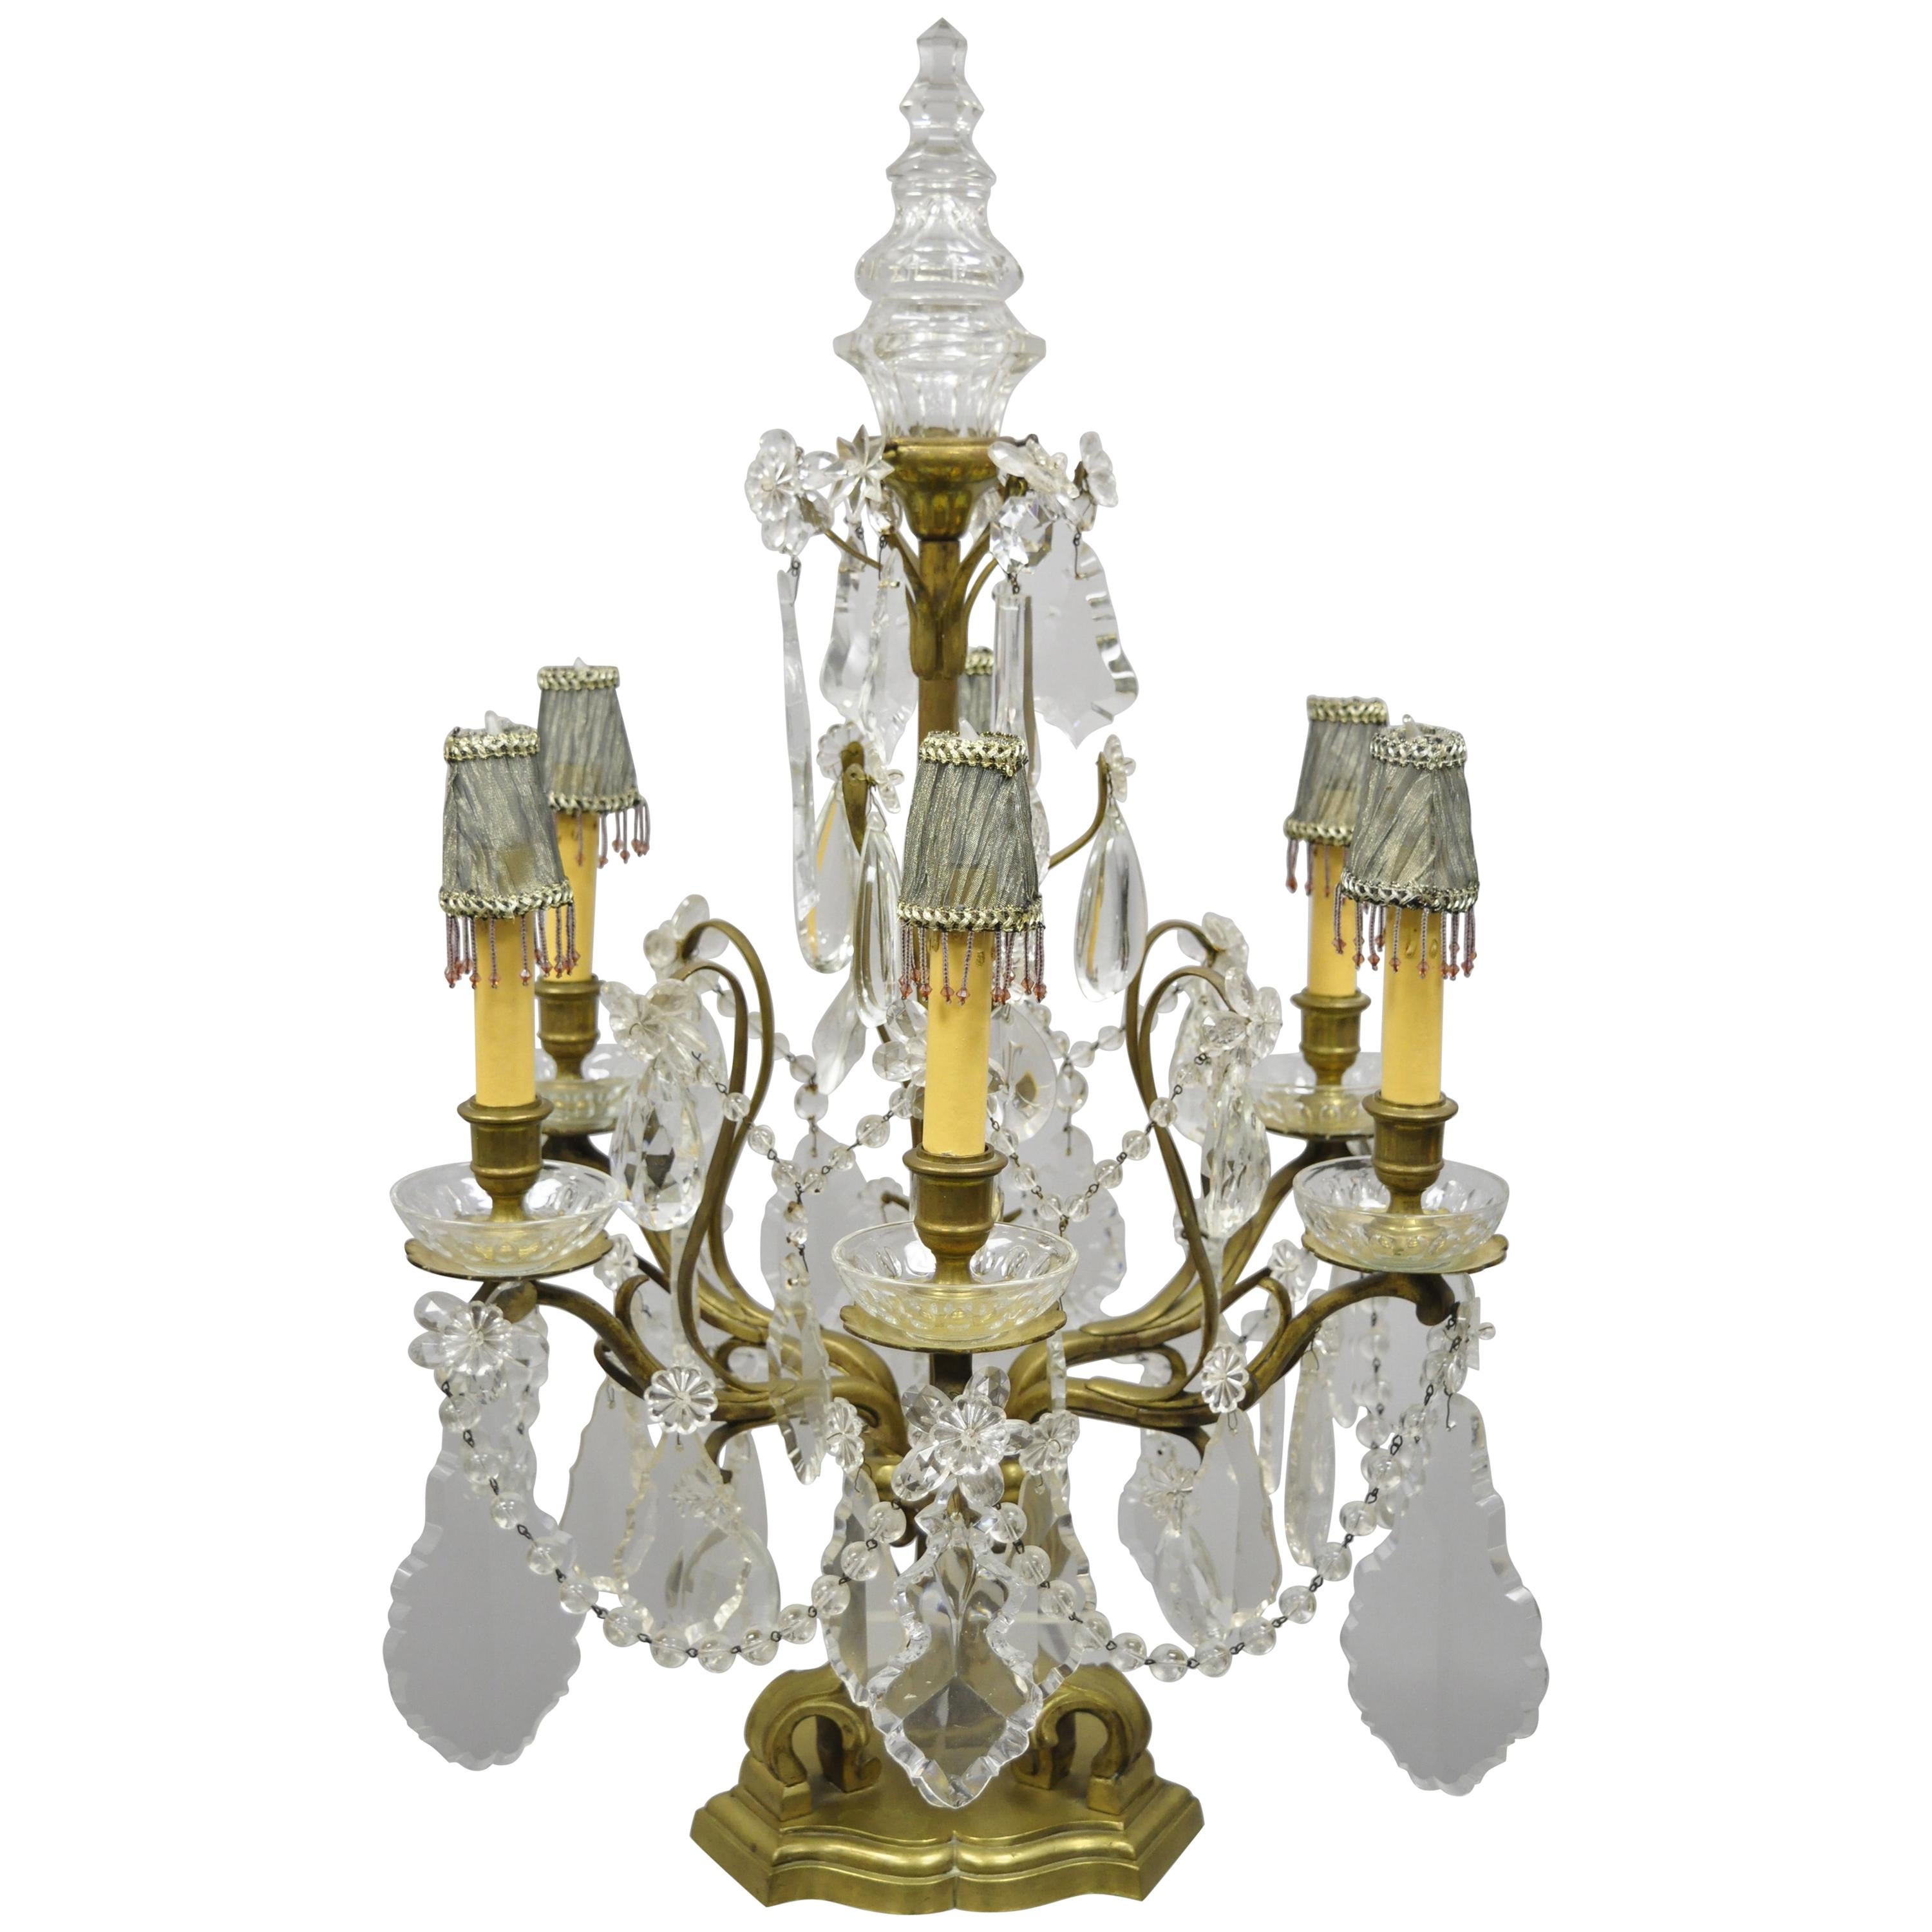 French Louis XVI Bronze and Crystal Prism Girandole Electrified Candelabra Lamp